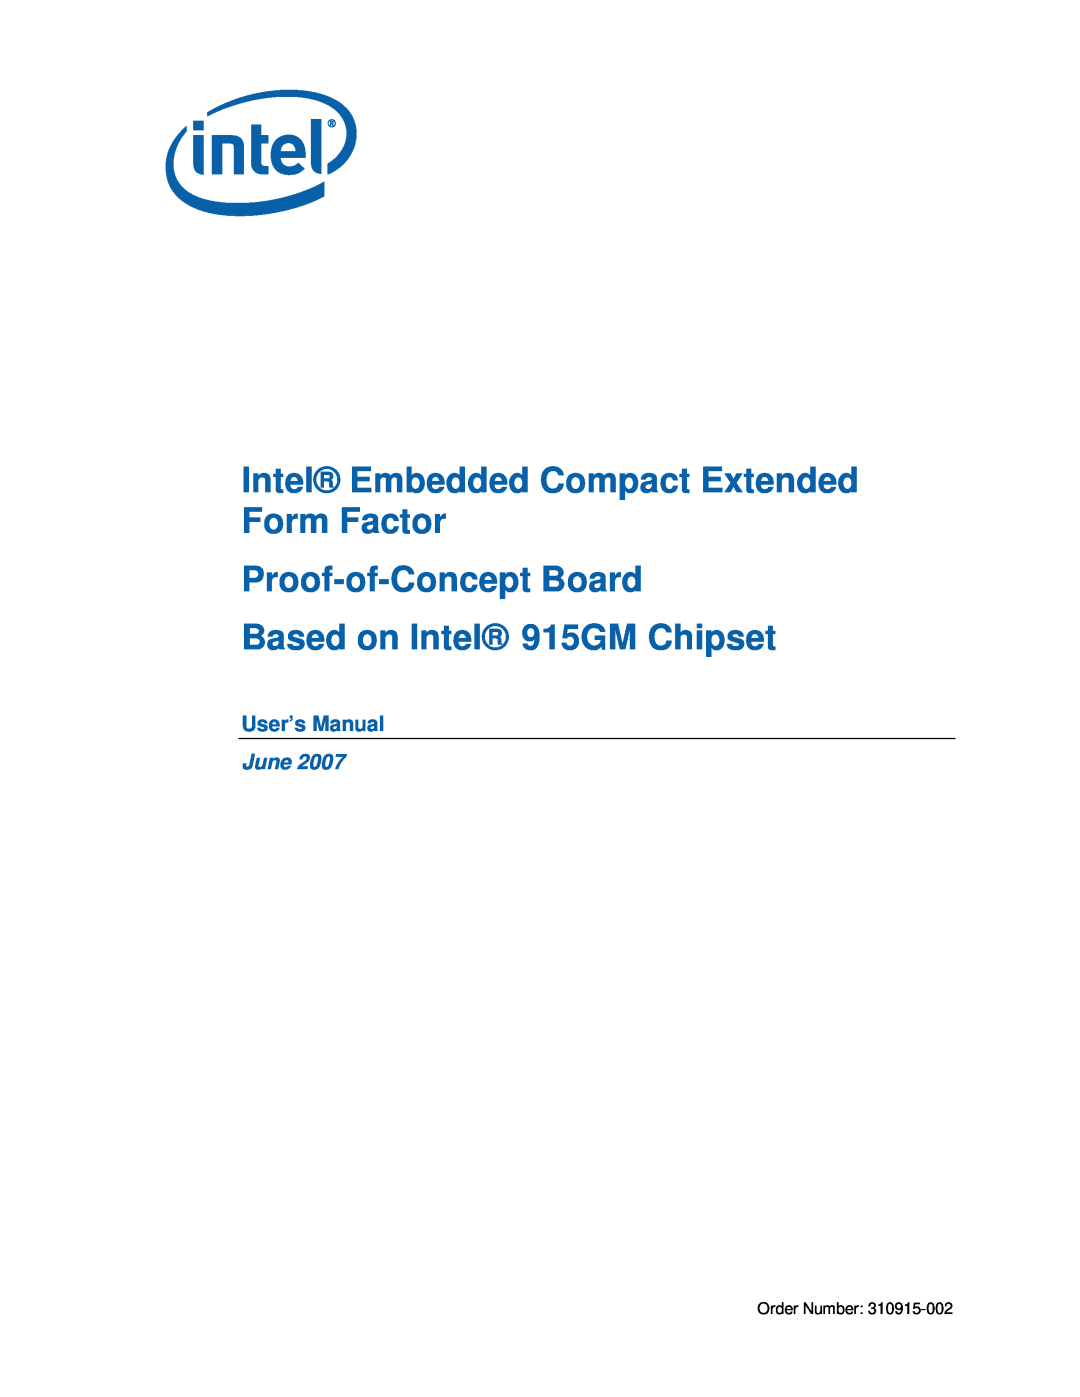 Intel user manual Intel Embedded Compact Extended Form Factor, Proof-of-ConceptBoard, Based on Intel 915GM Chipset 